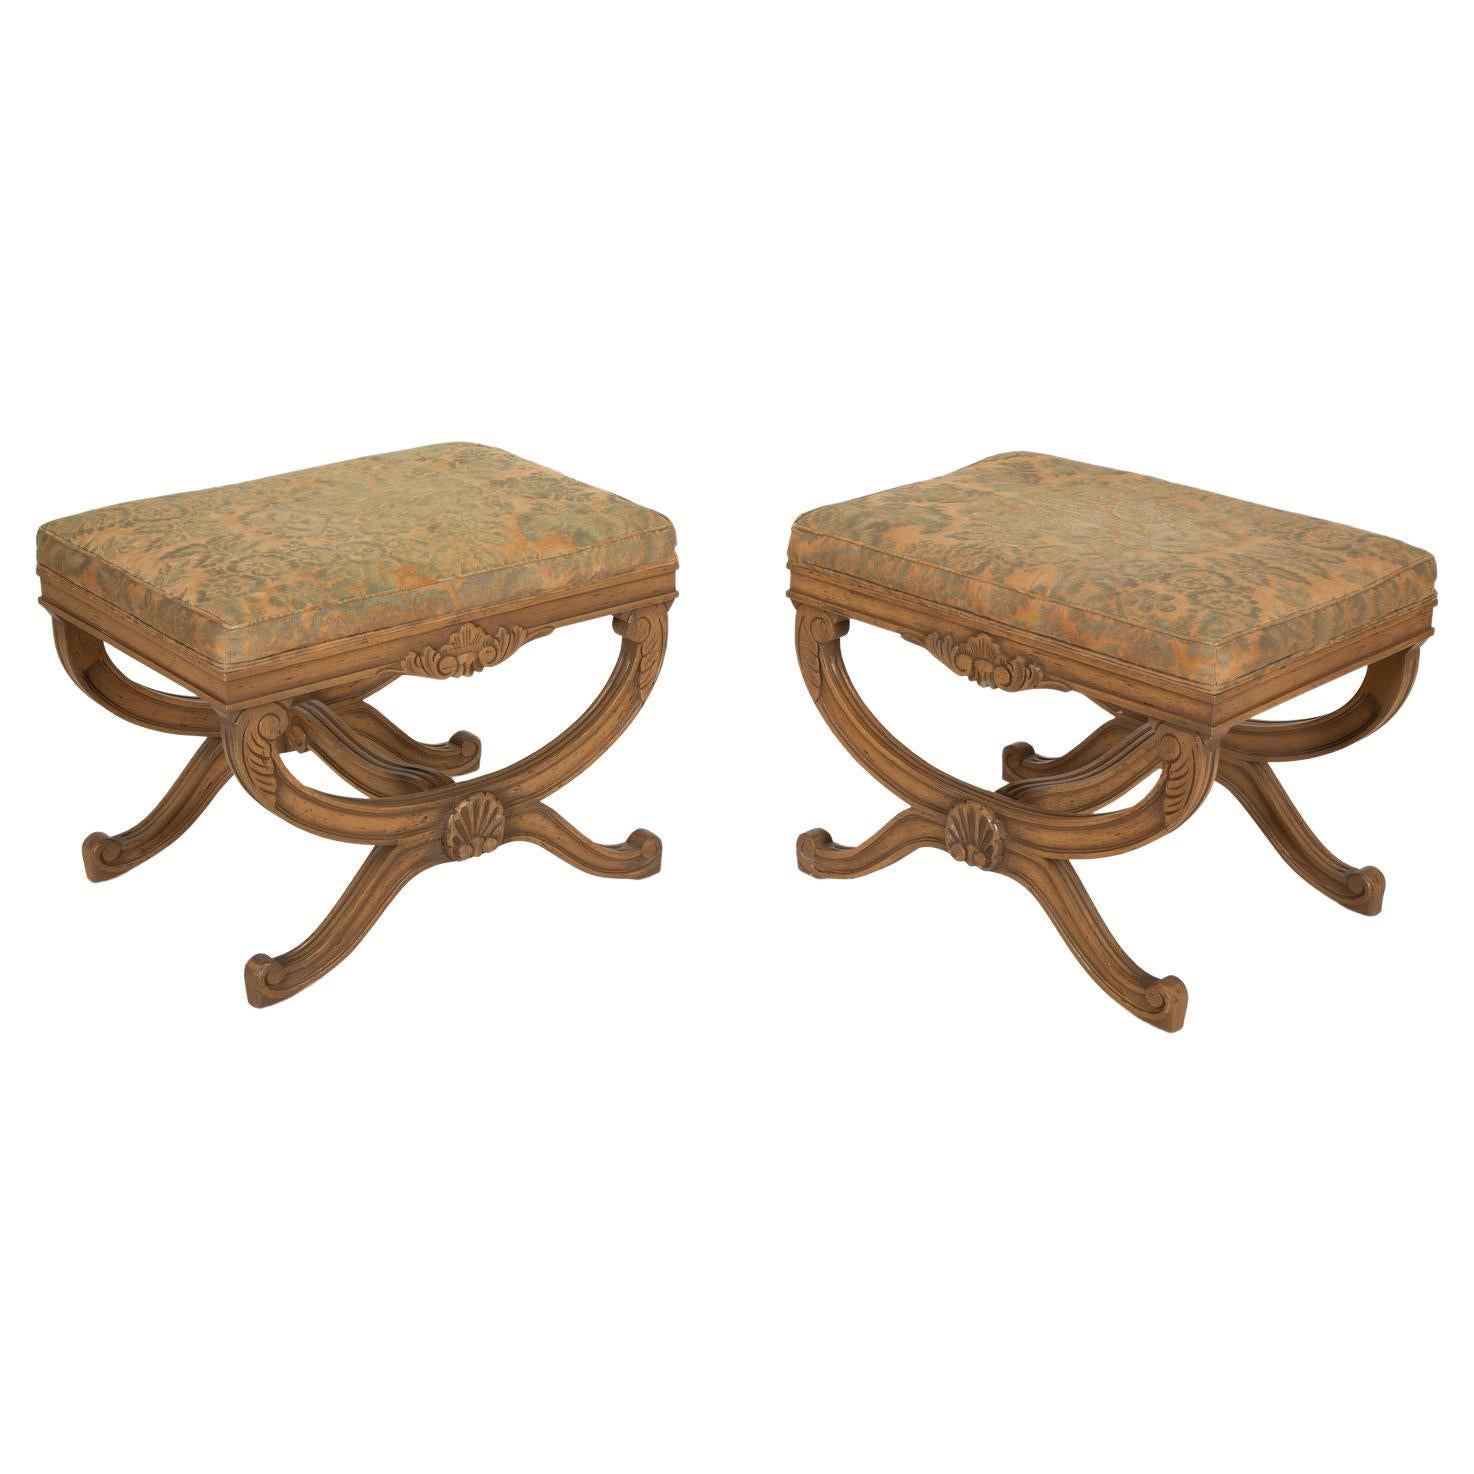 Pair of Upholstered Louis XVI Style Curule Stools, 20th Century